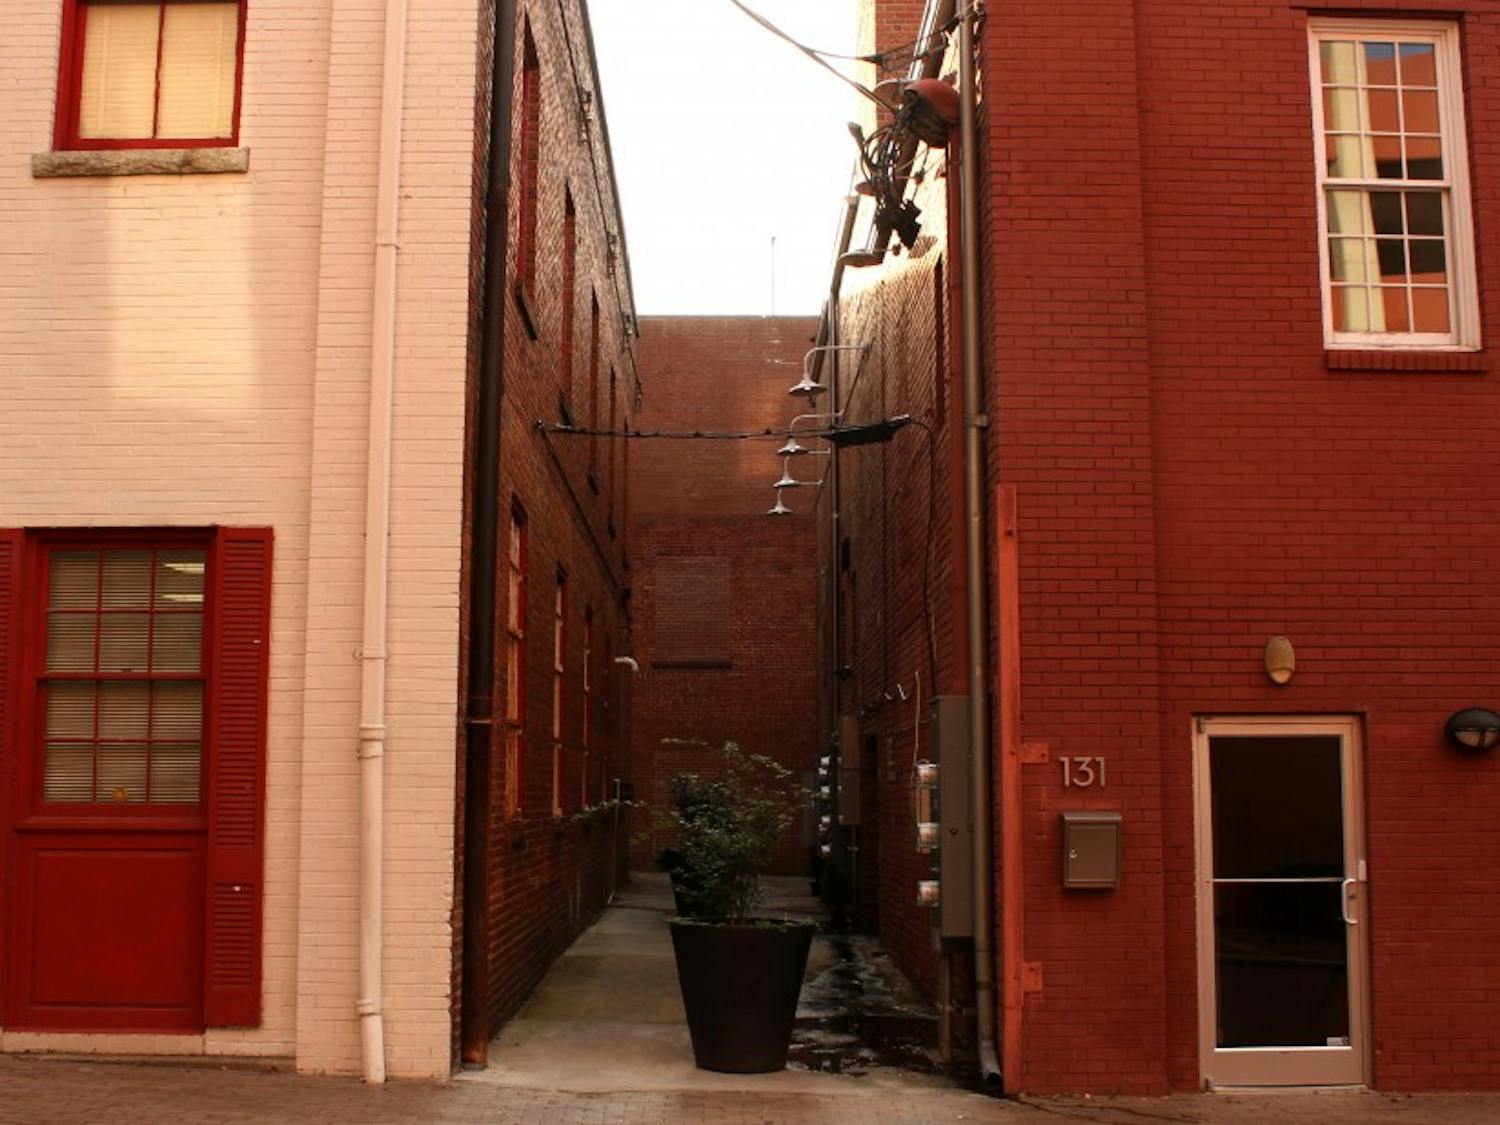 Alley 26, pictured above, will soon be home to small start-ups and businesses after the conclusion of a major reconstructive project.